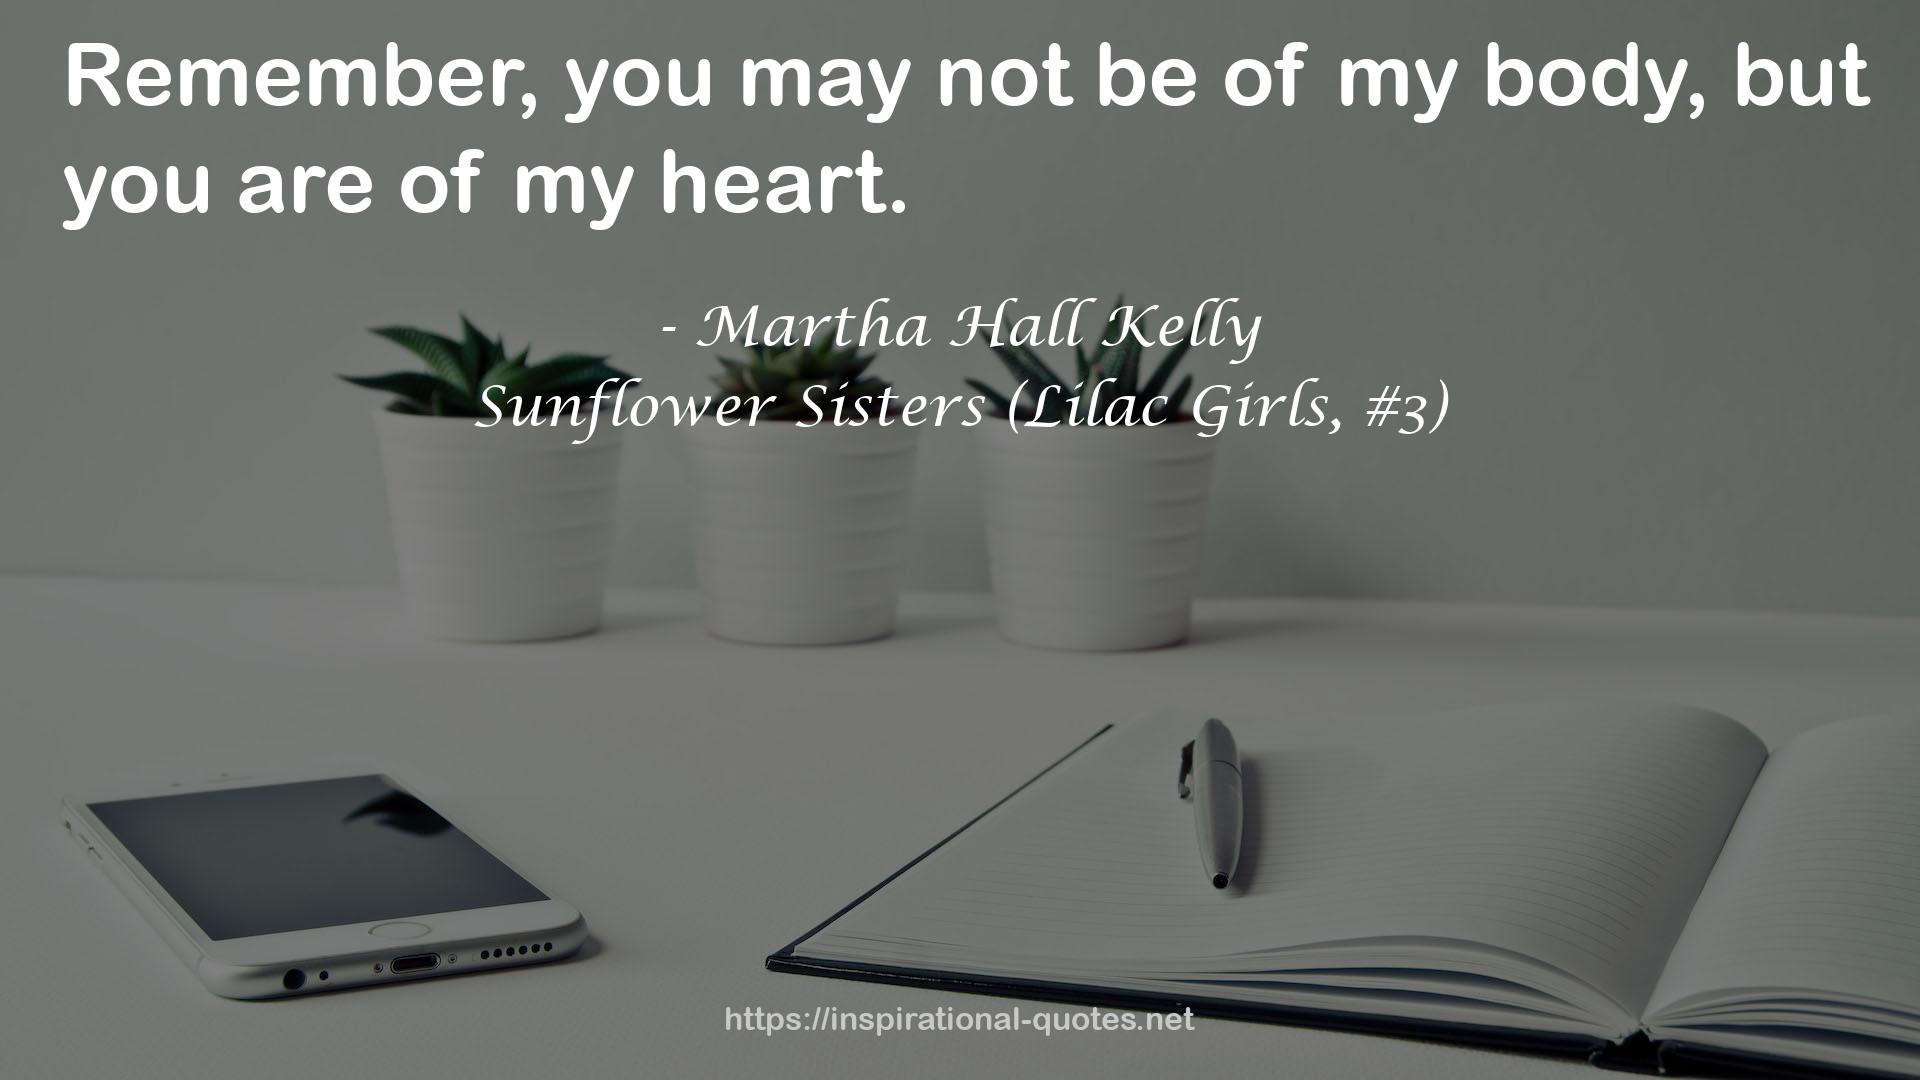 Sunflower Sisters (Lilac Girls, #3) QUOTES